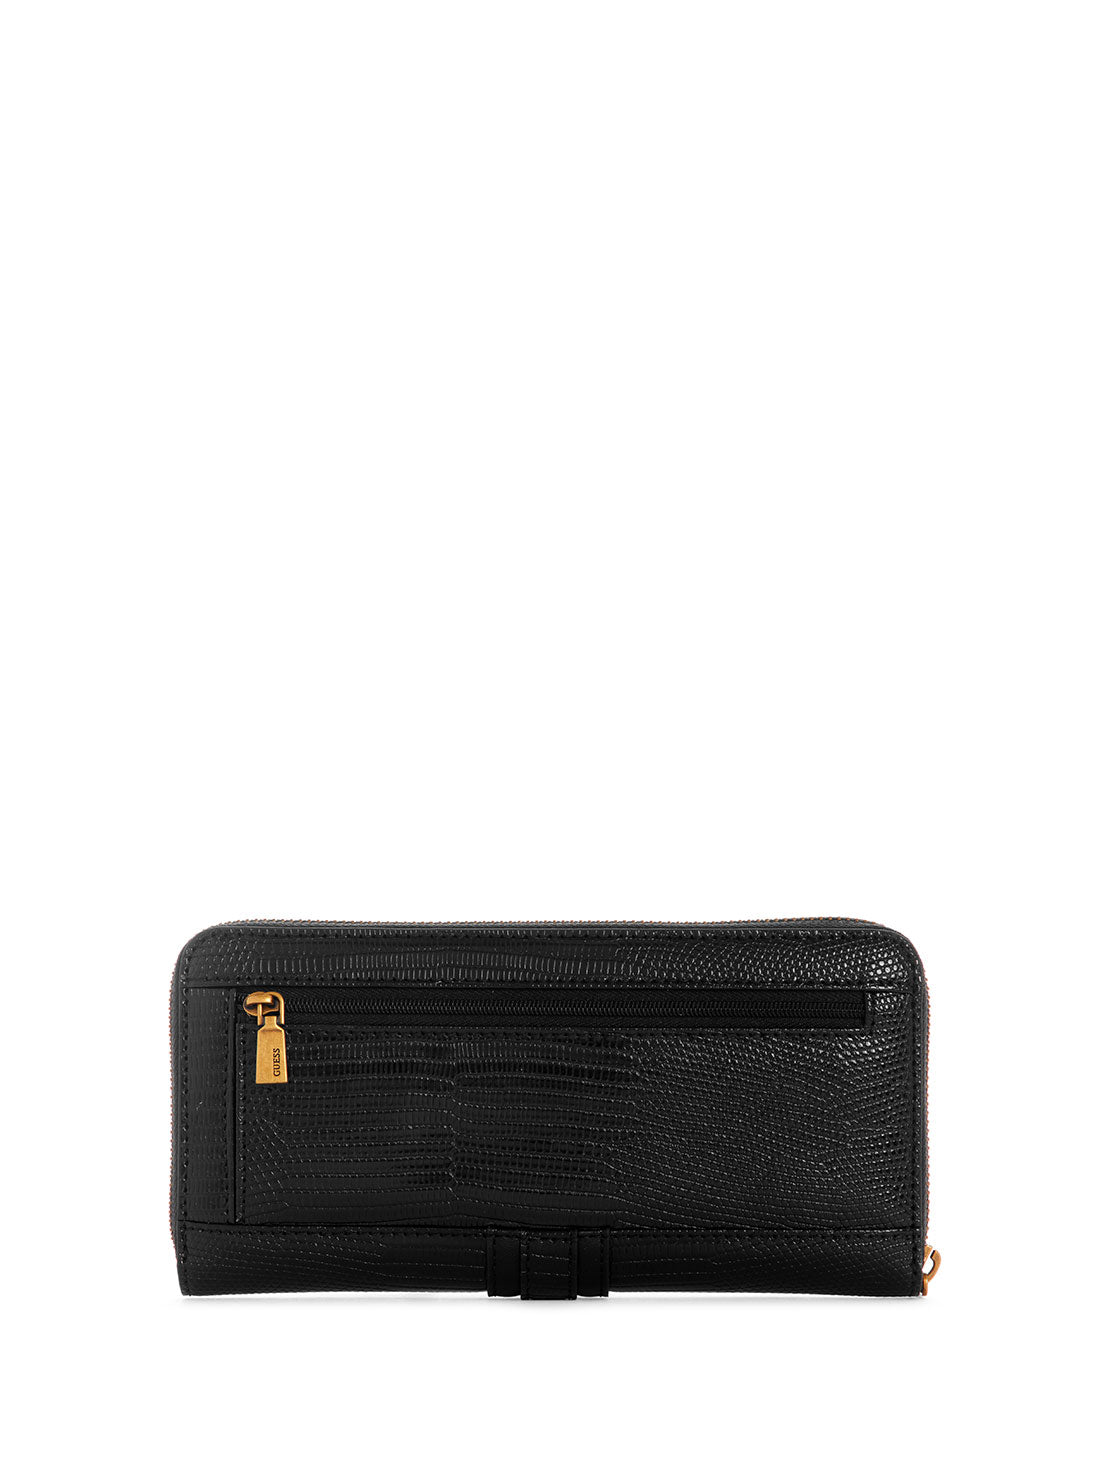 GUESS Women's Black Ginvera Large Wallet KB873446 Back View